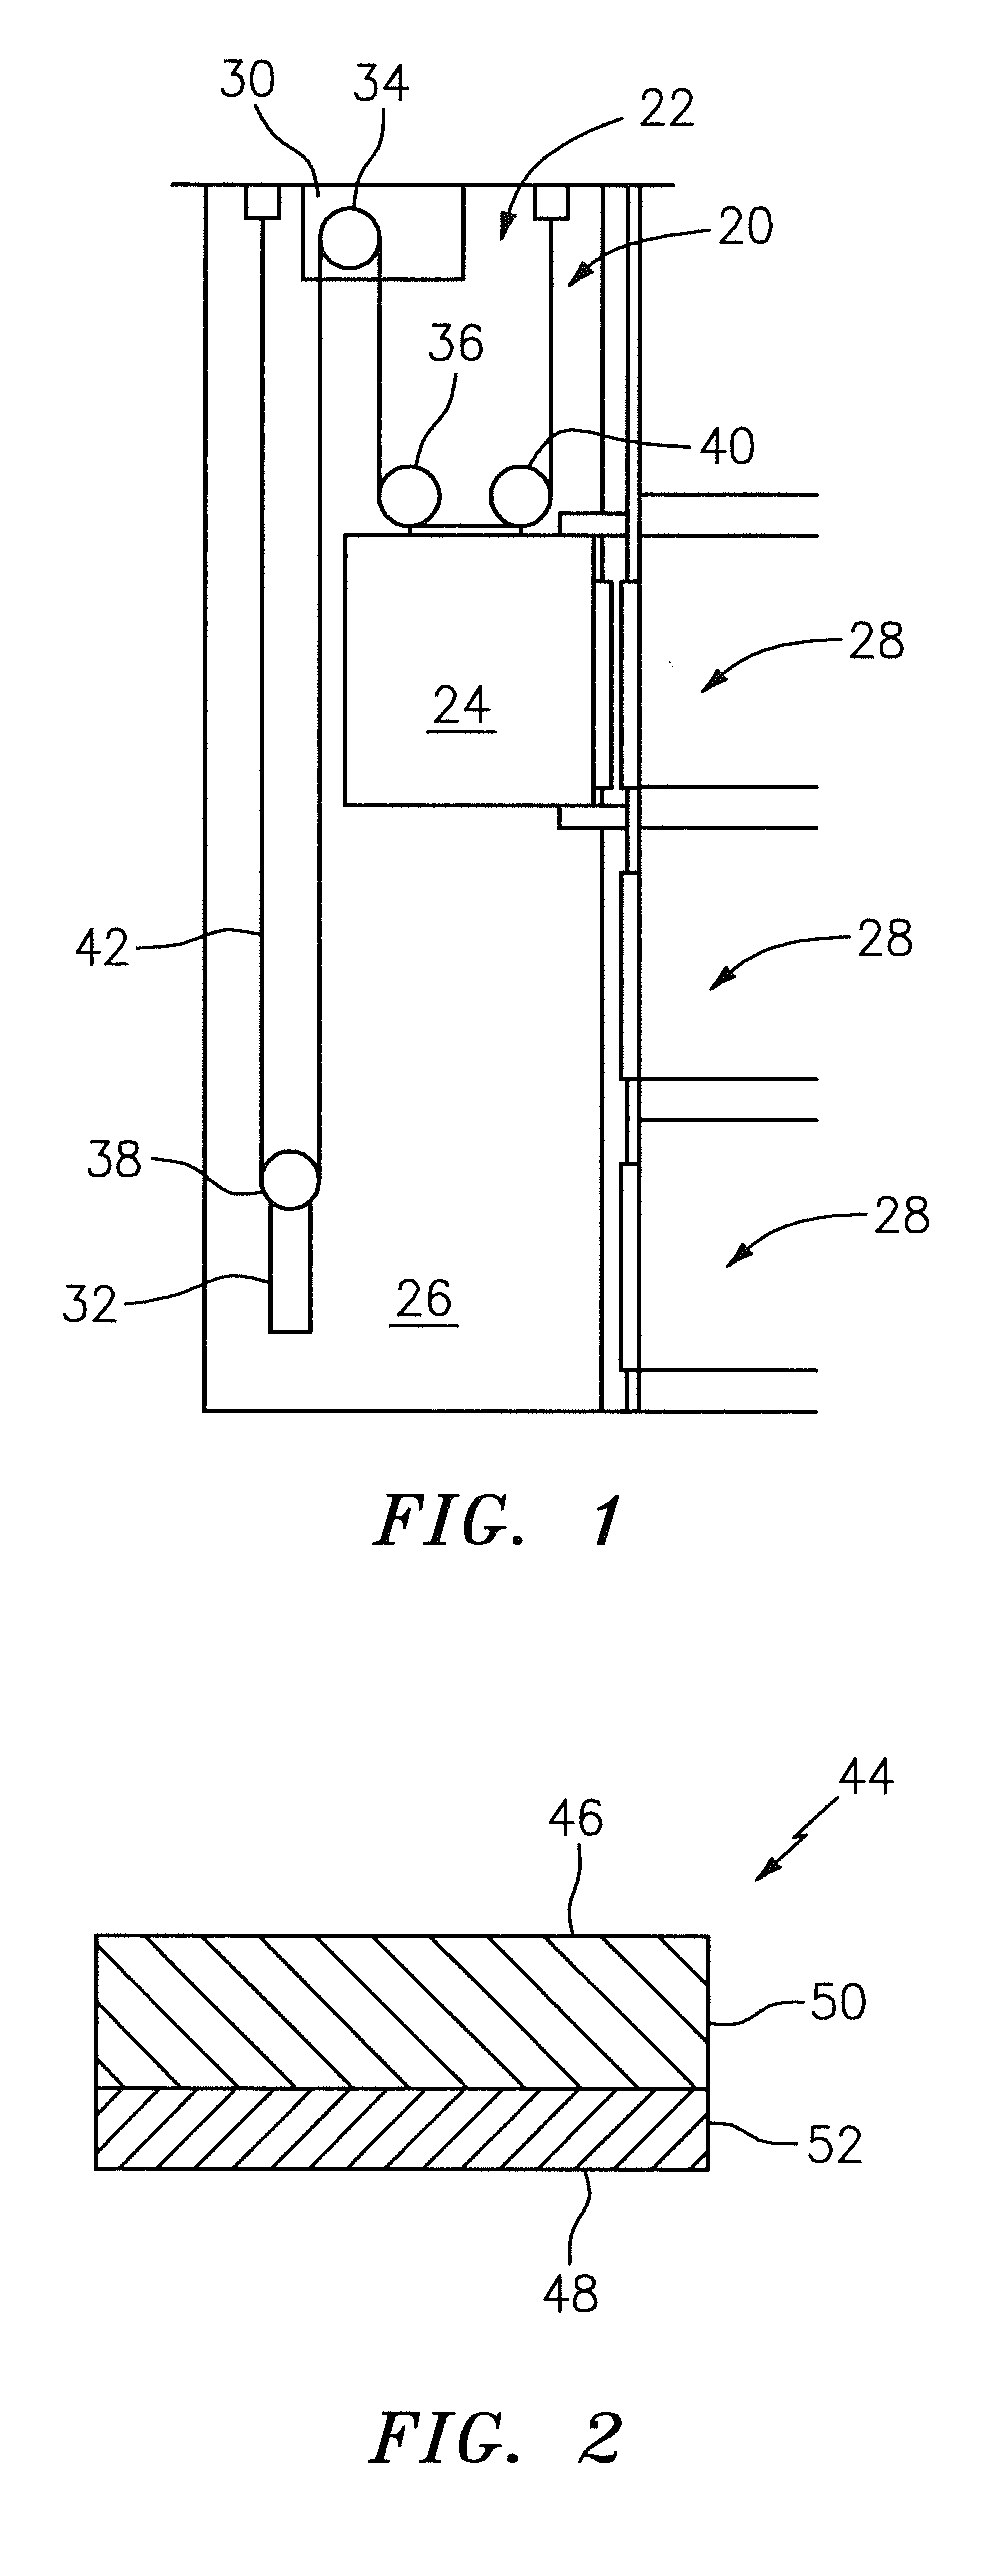 Methods and apparatuses for applying a substrate onto an elevator sheave